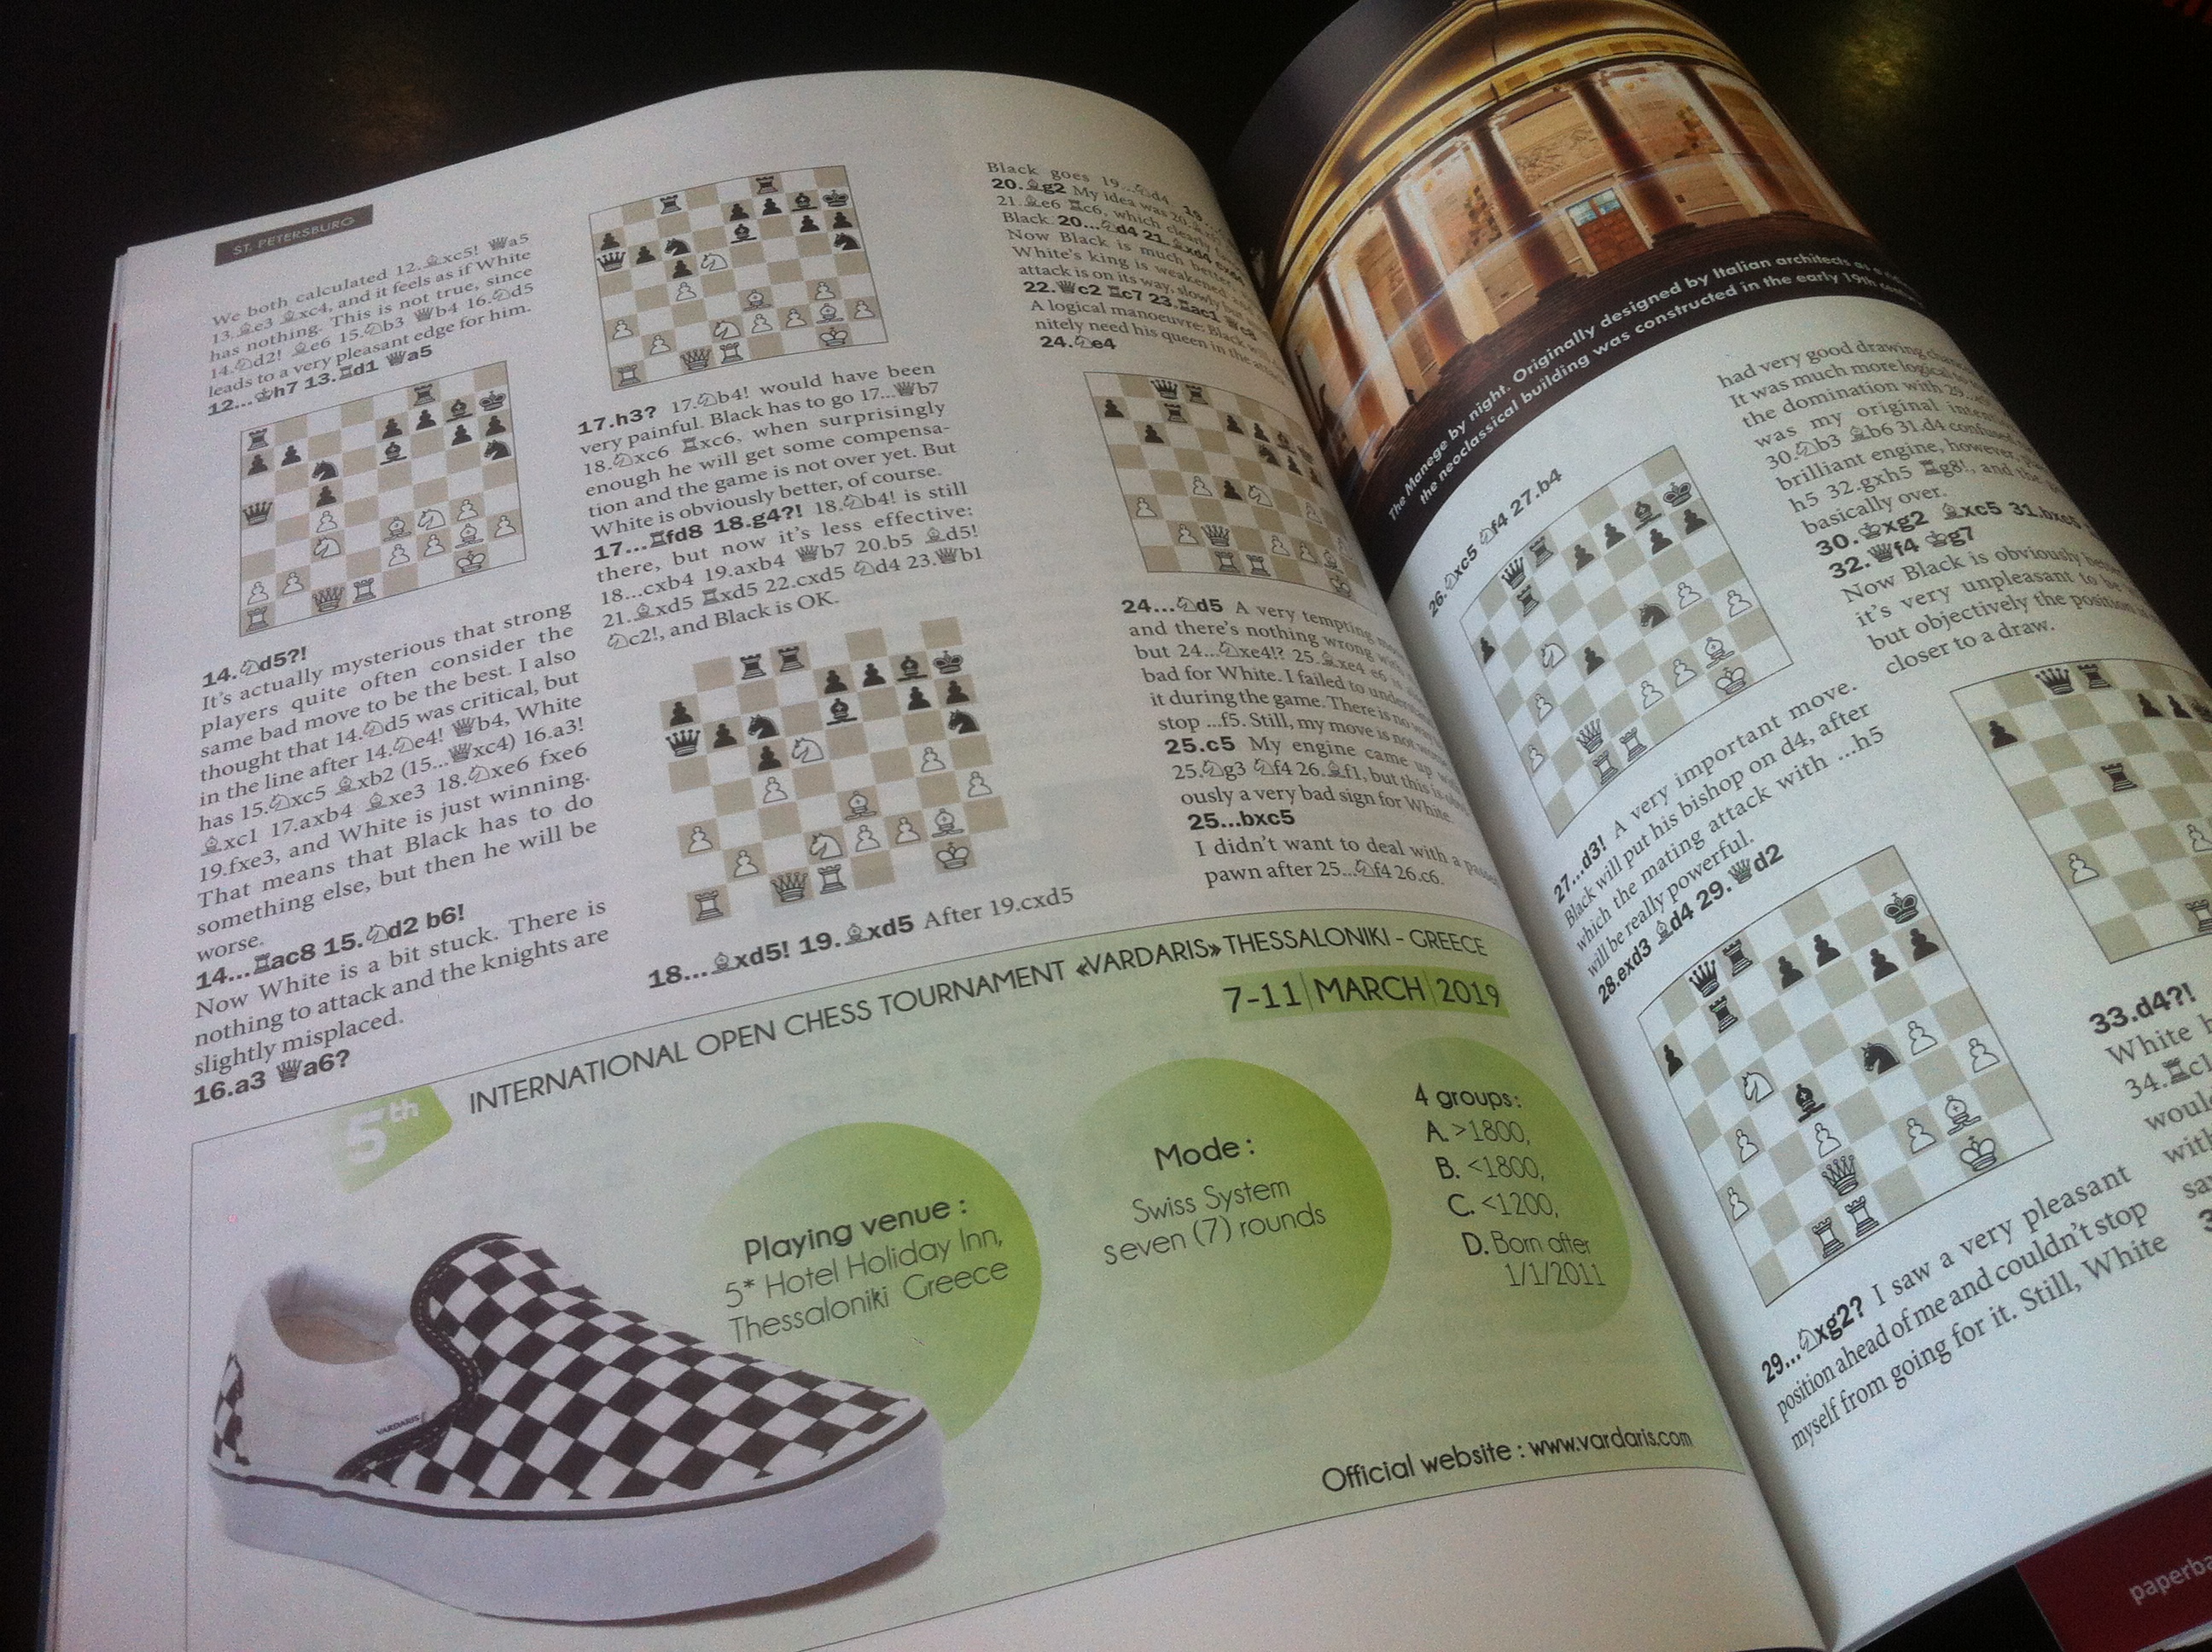 "Vardaris" in the latest issue of "New In Chess" magazine